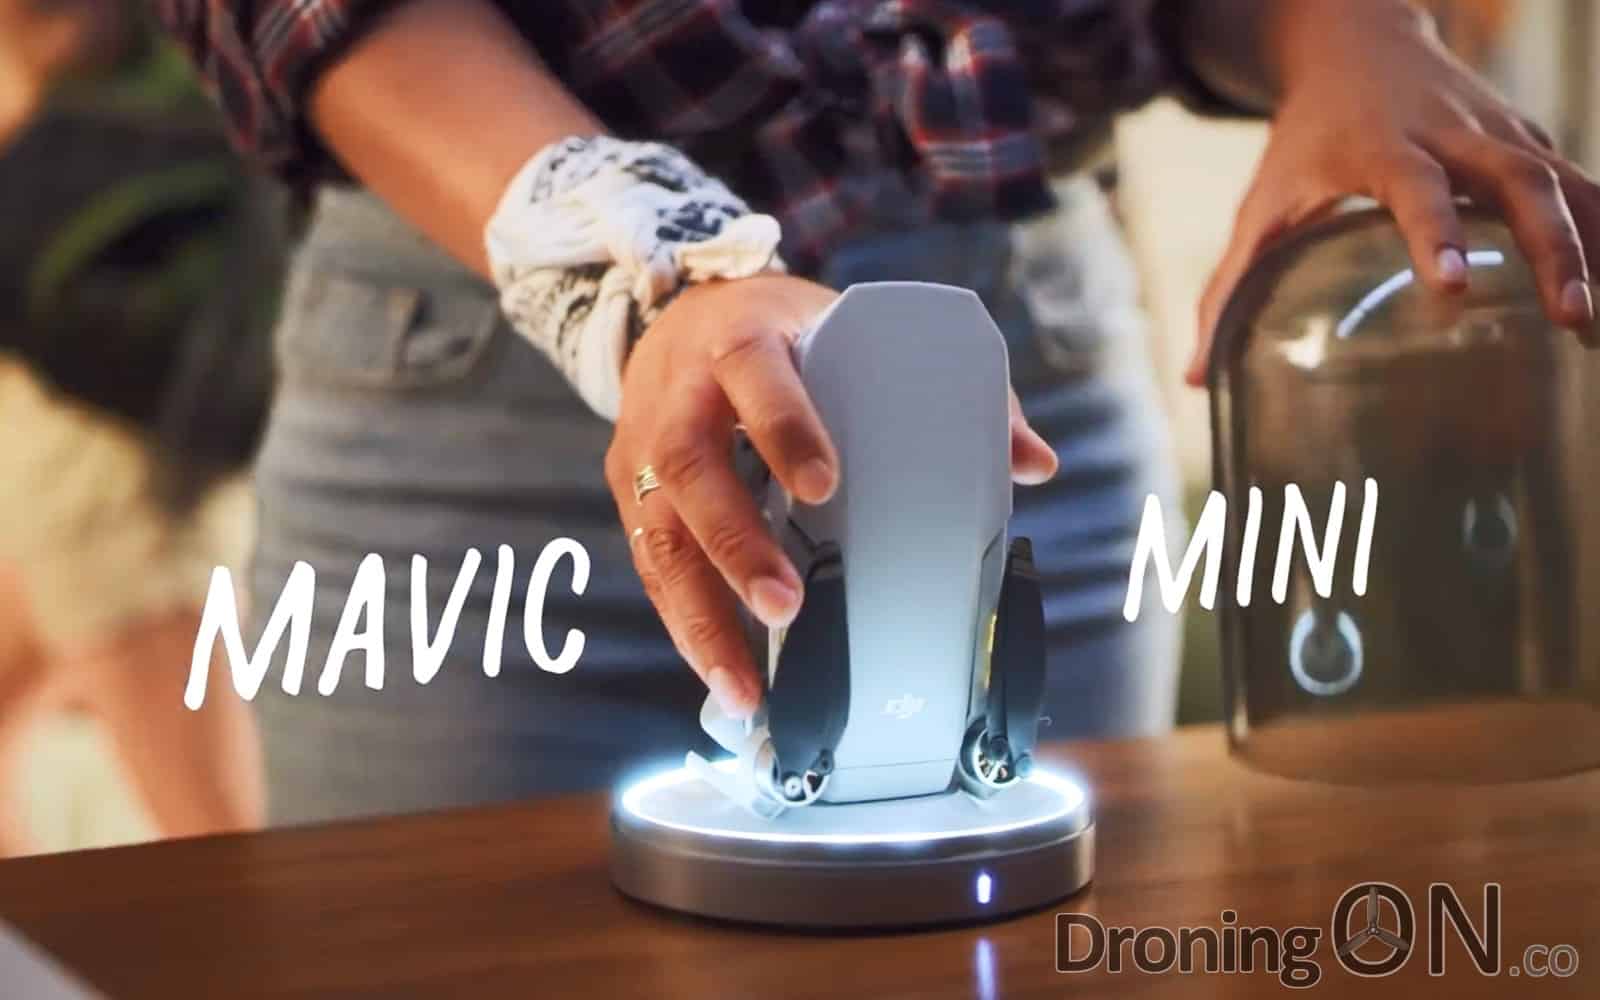 DJI MAVIC MINI V01.00.0500 FIRMWARE ADDS MANUAL ISO AND SHUTTER-SPEED Read more about this on DroningON: https://www.droningon.co/?p=6219&preview=true